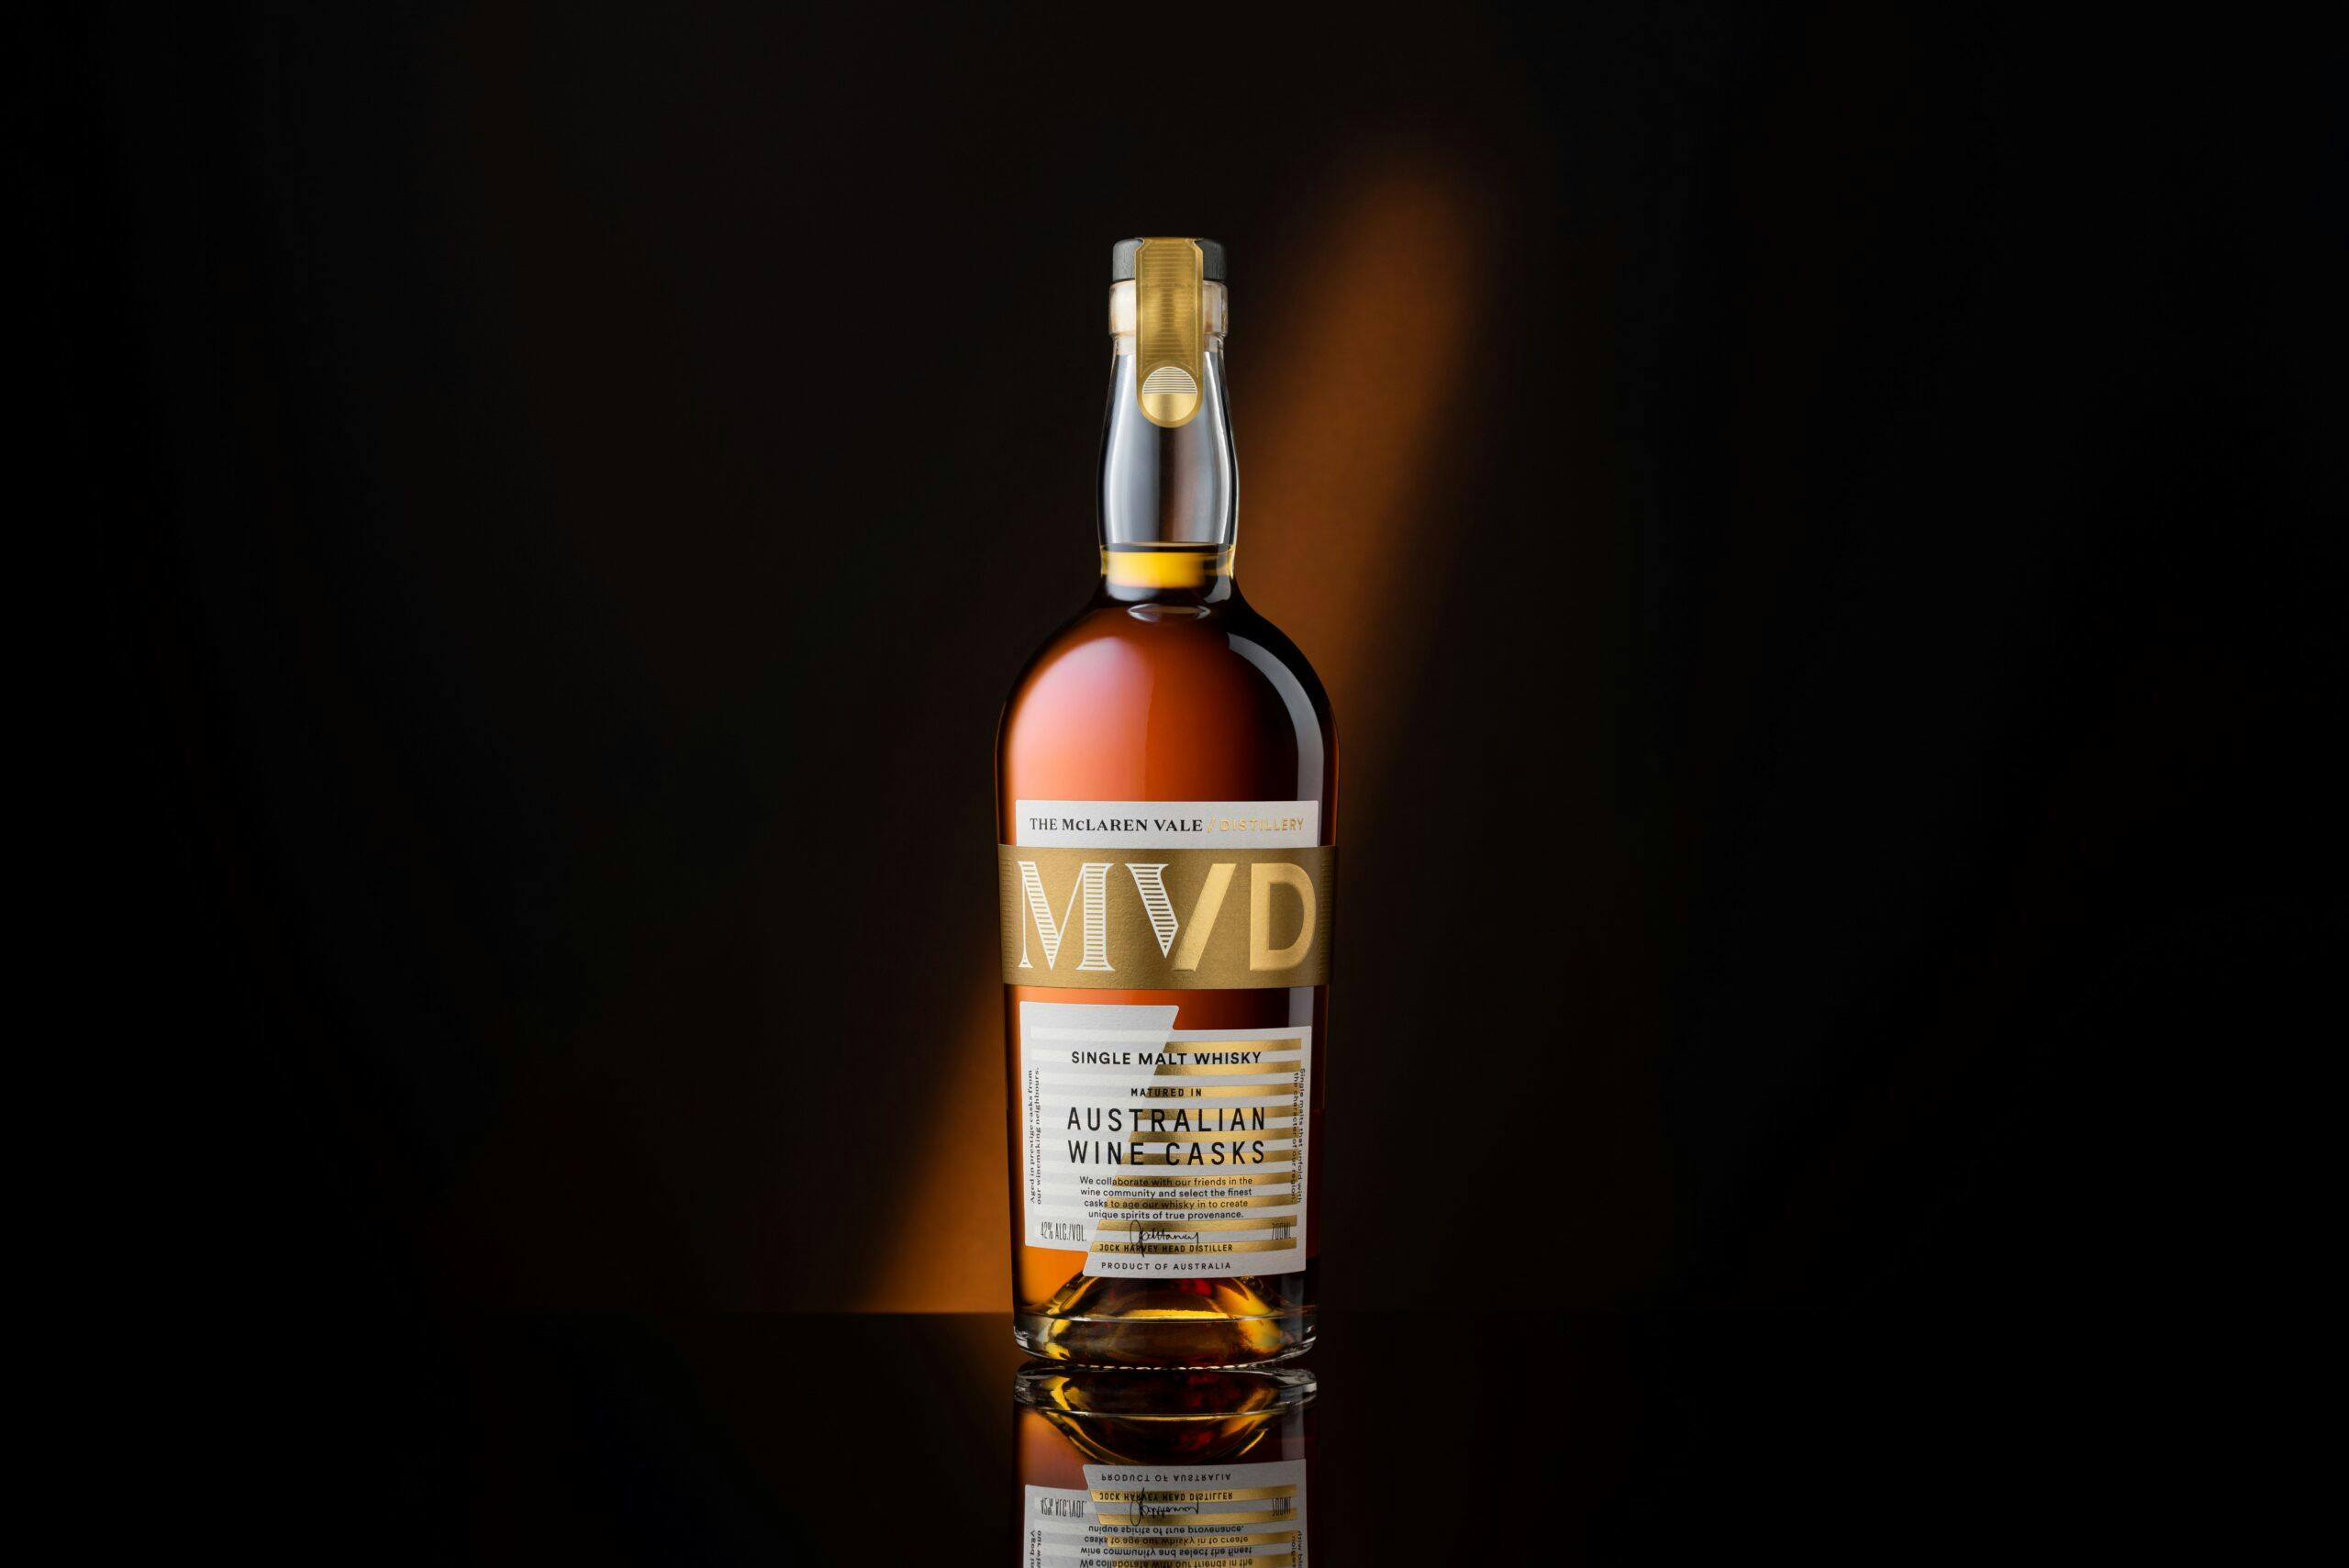 Image of Whisky label uses embellishments for luxury cues